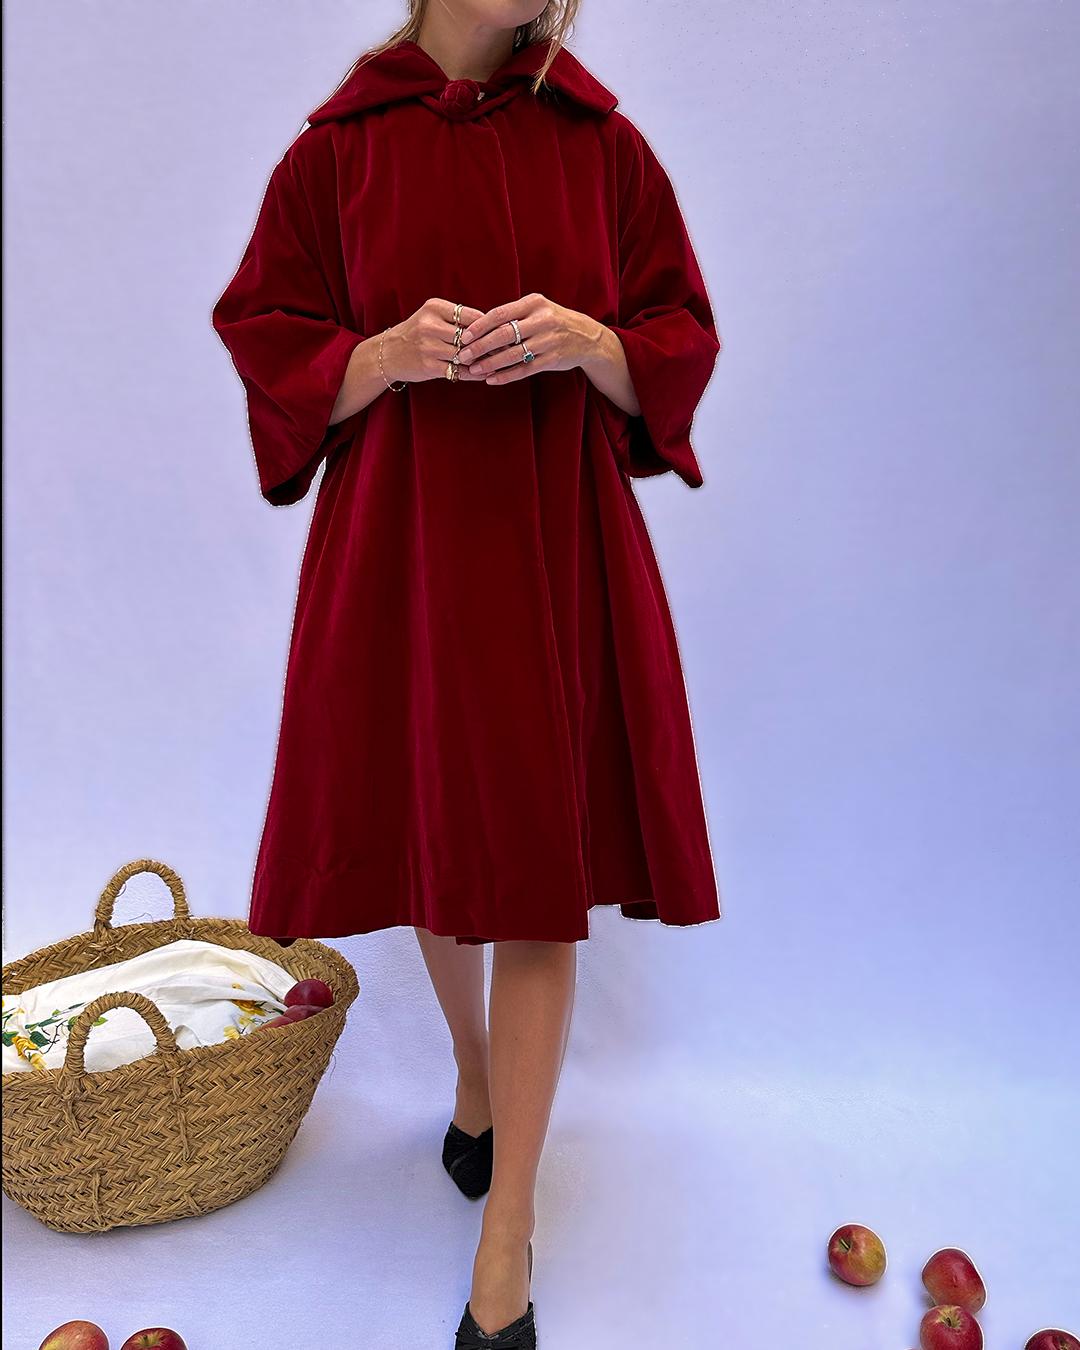 RARE VINTAGE 1950s RED VELVET SWING COAT/CAPE: This vintage coat is so special— you could honestly spend a lifetime searching, and not find one just like it. Made in the early 1950s (possibly late 1940s) it's crafted from the most gorgeous plush